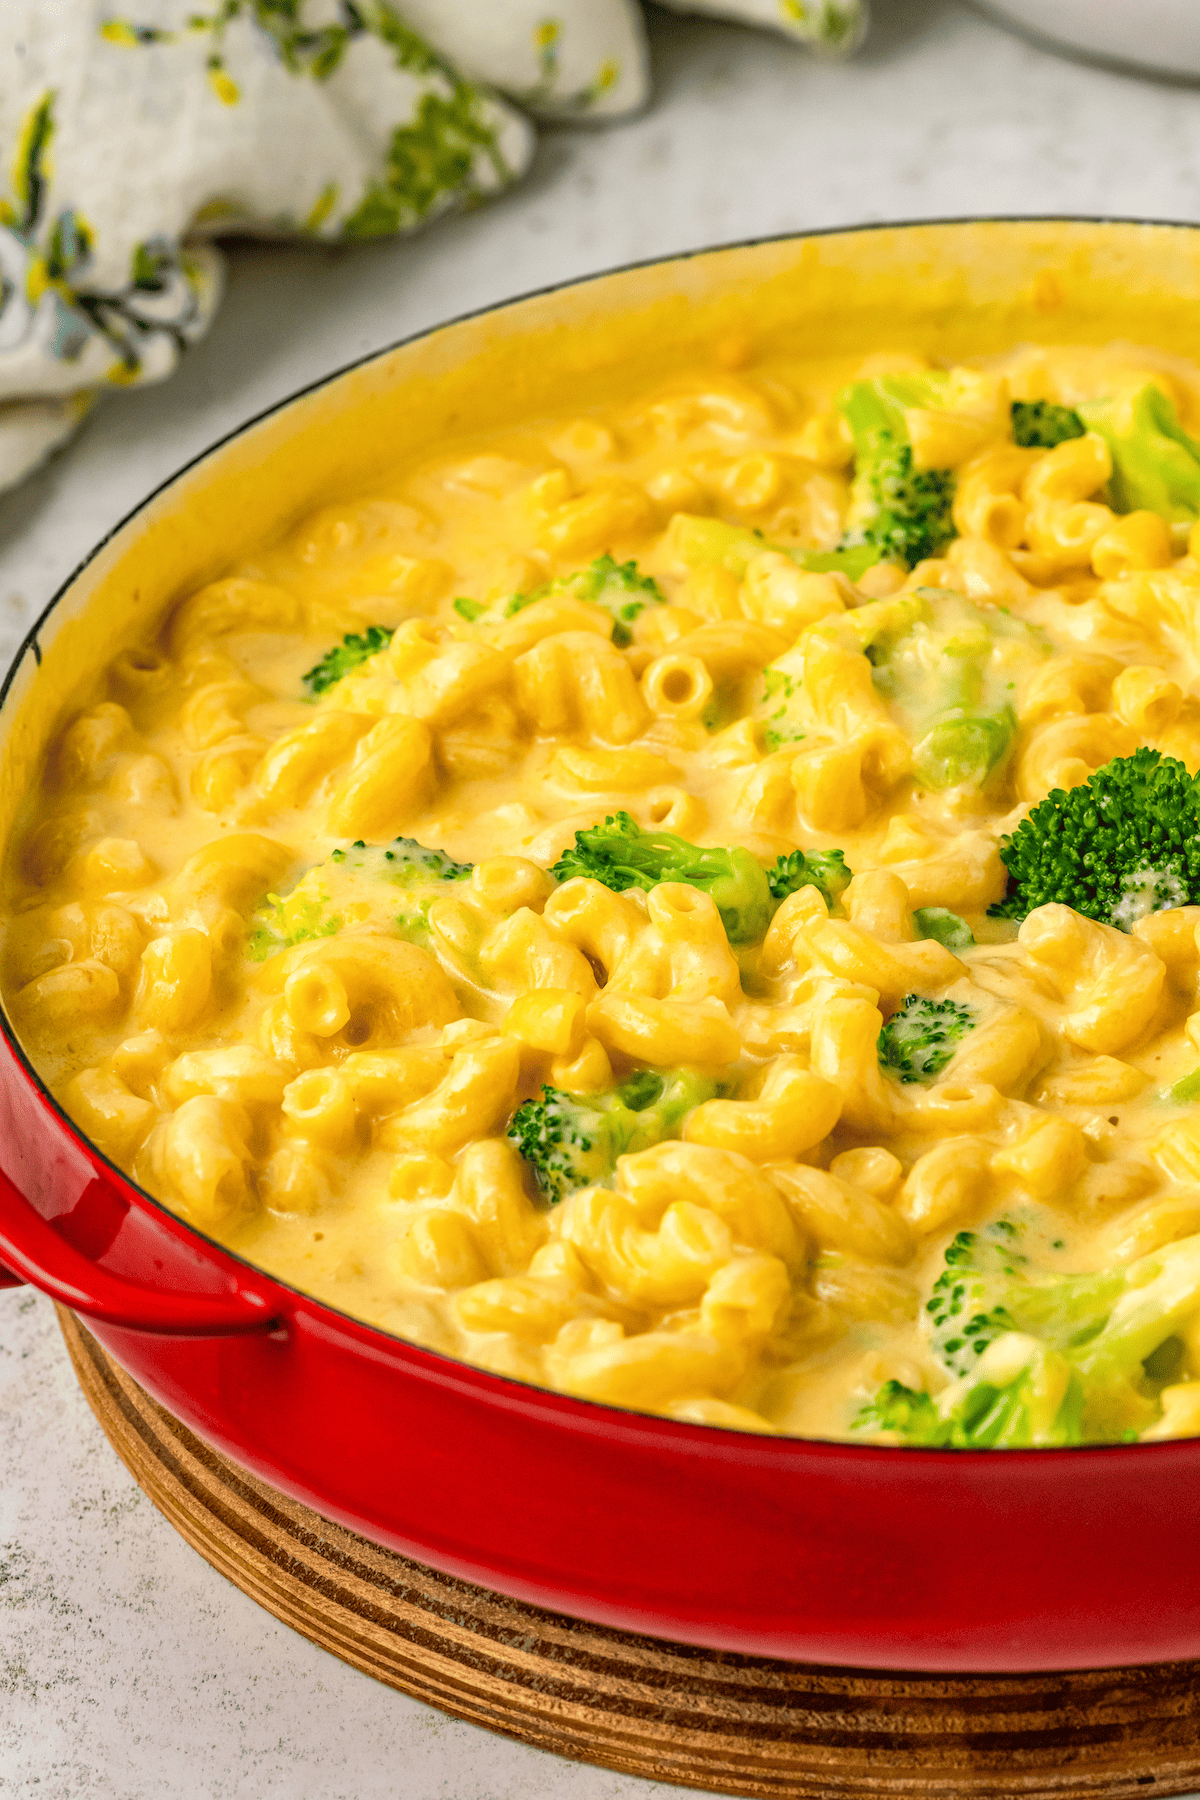 Creamy mac and cheese with pieces of broccoli in it.